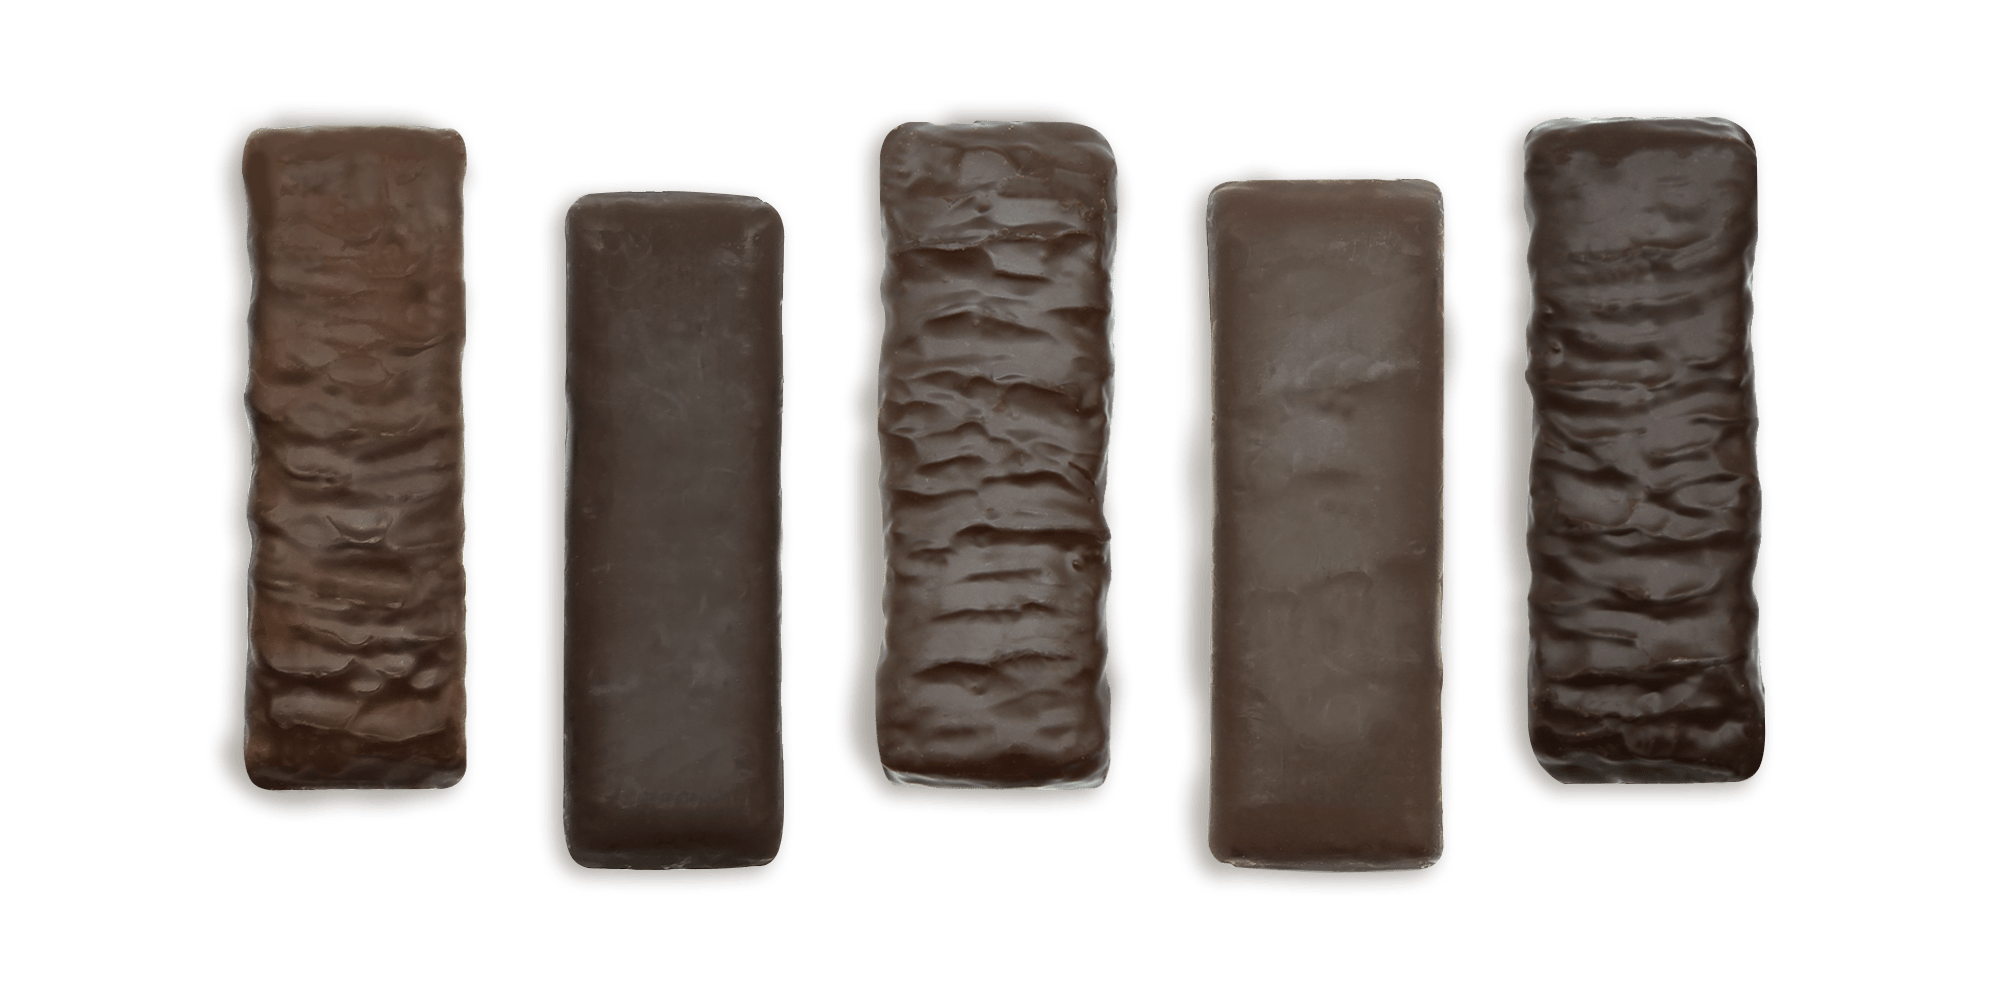 Functional Food Bar Manufacturing Variety Chocolate Coverings and Flavors